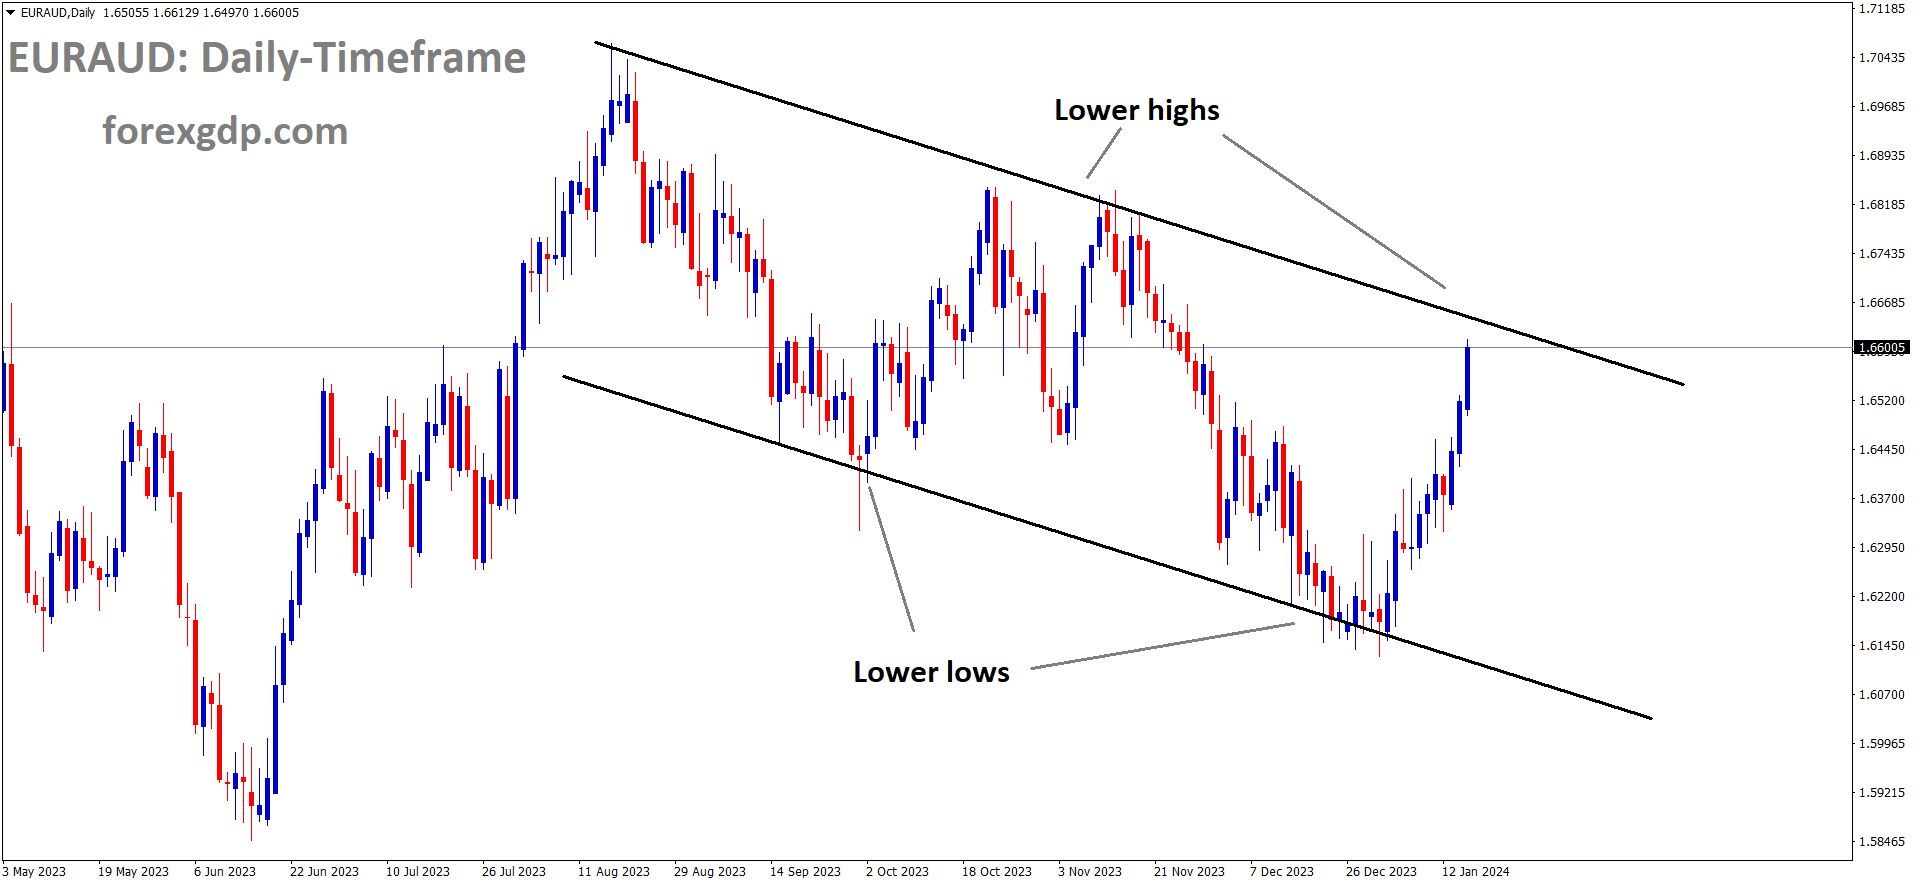 EURAUD is moving in the Descending channel and the market has reached the lower high area of the channel 1